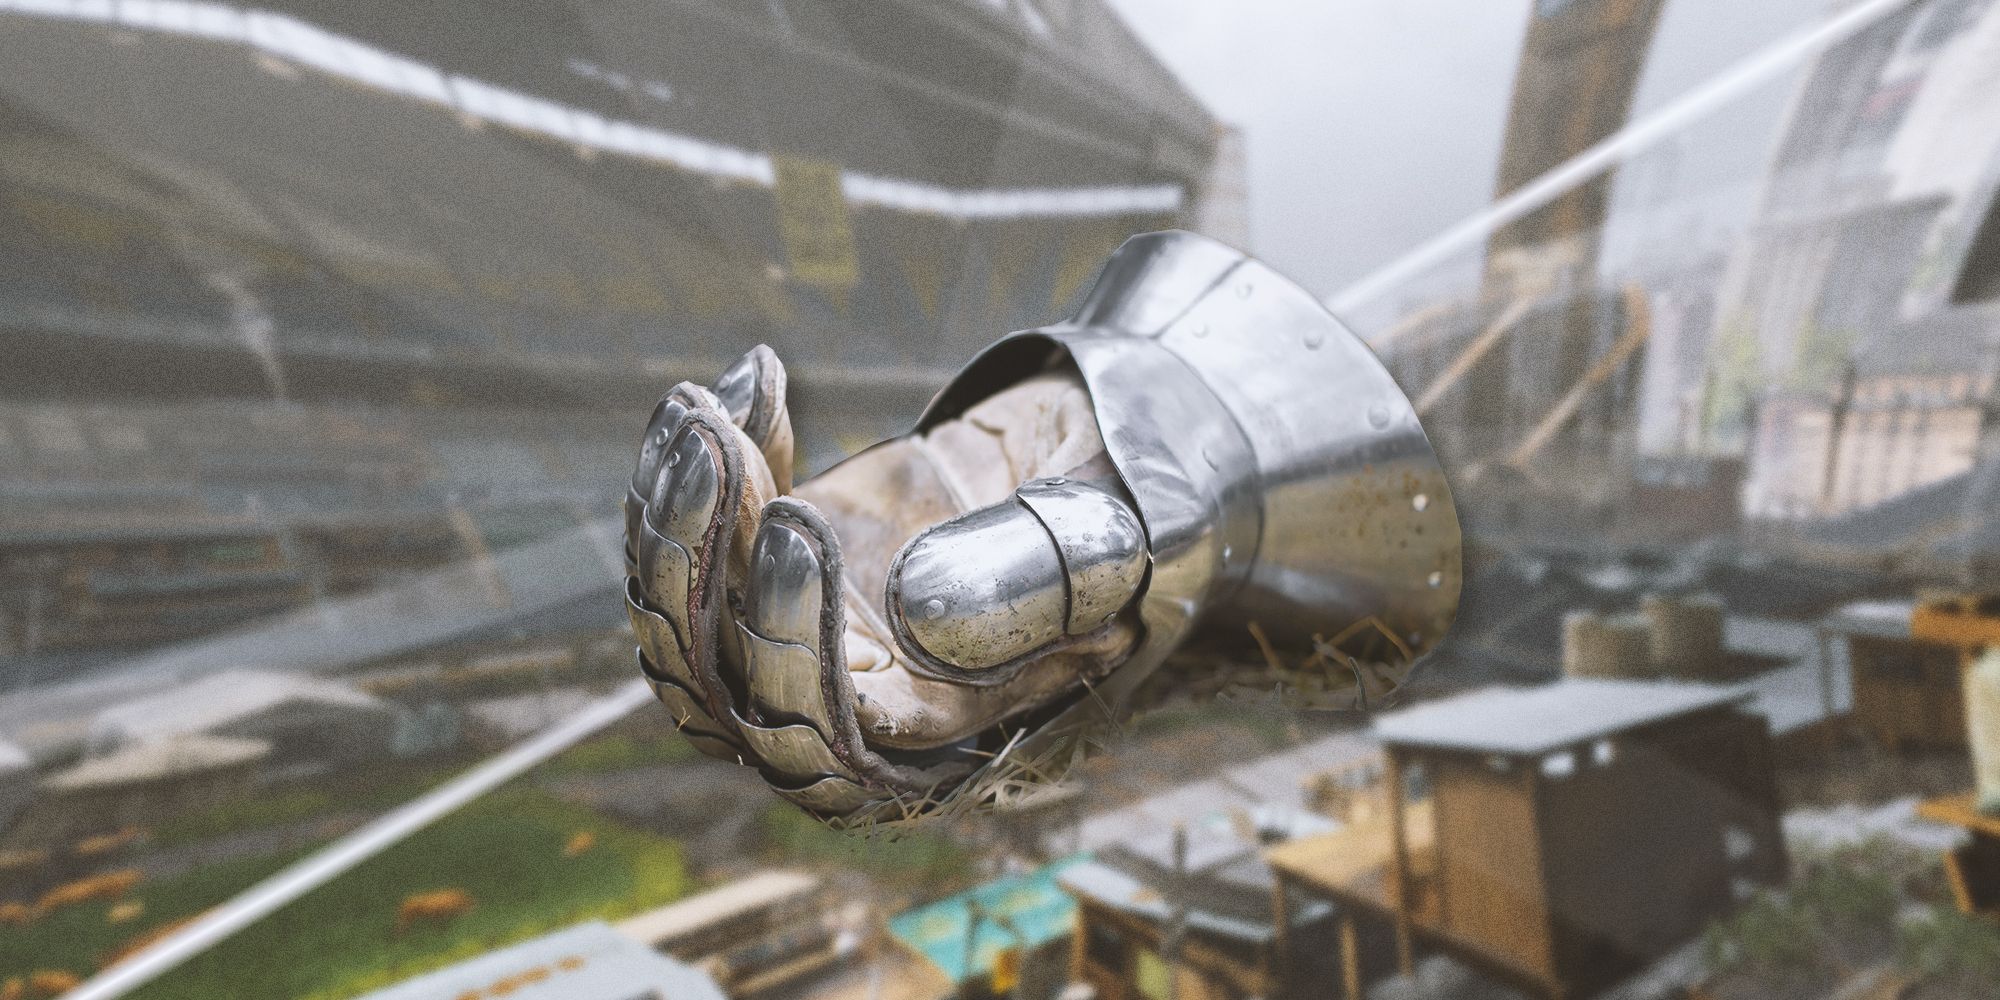 The WLF stadium from The Last of Us Part 2 with a big metal gauntlet.